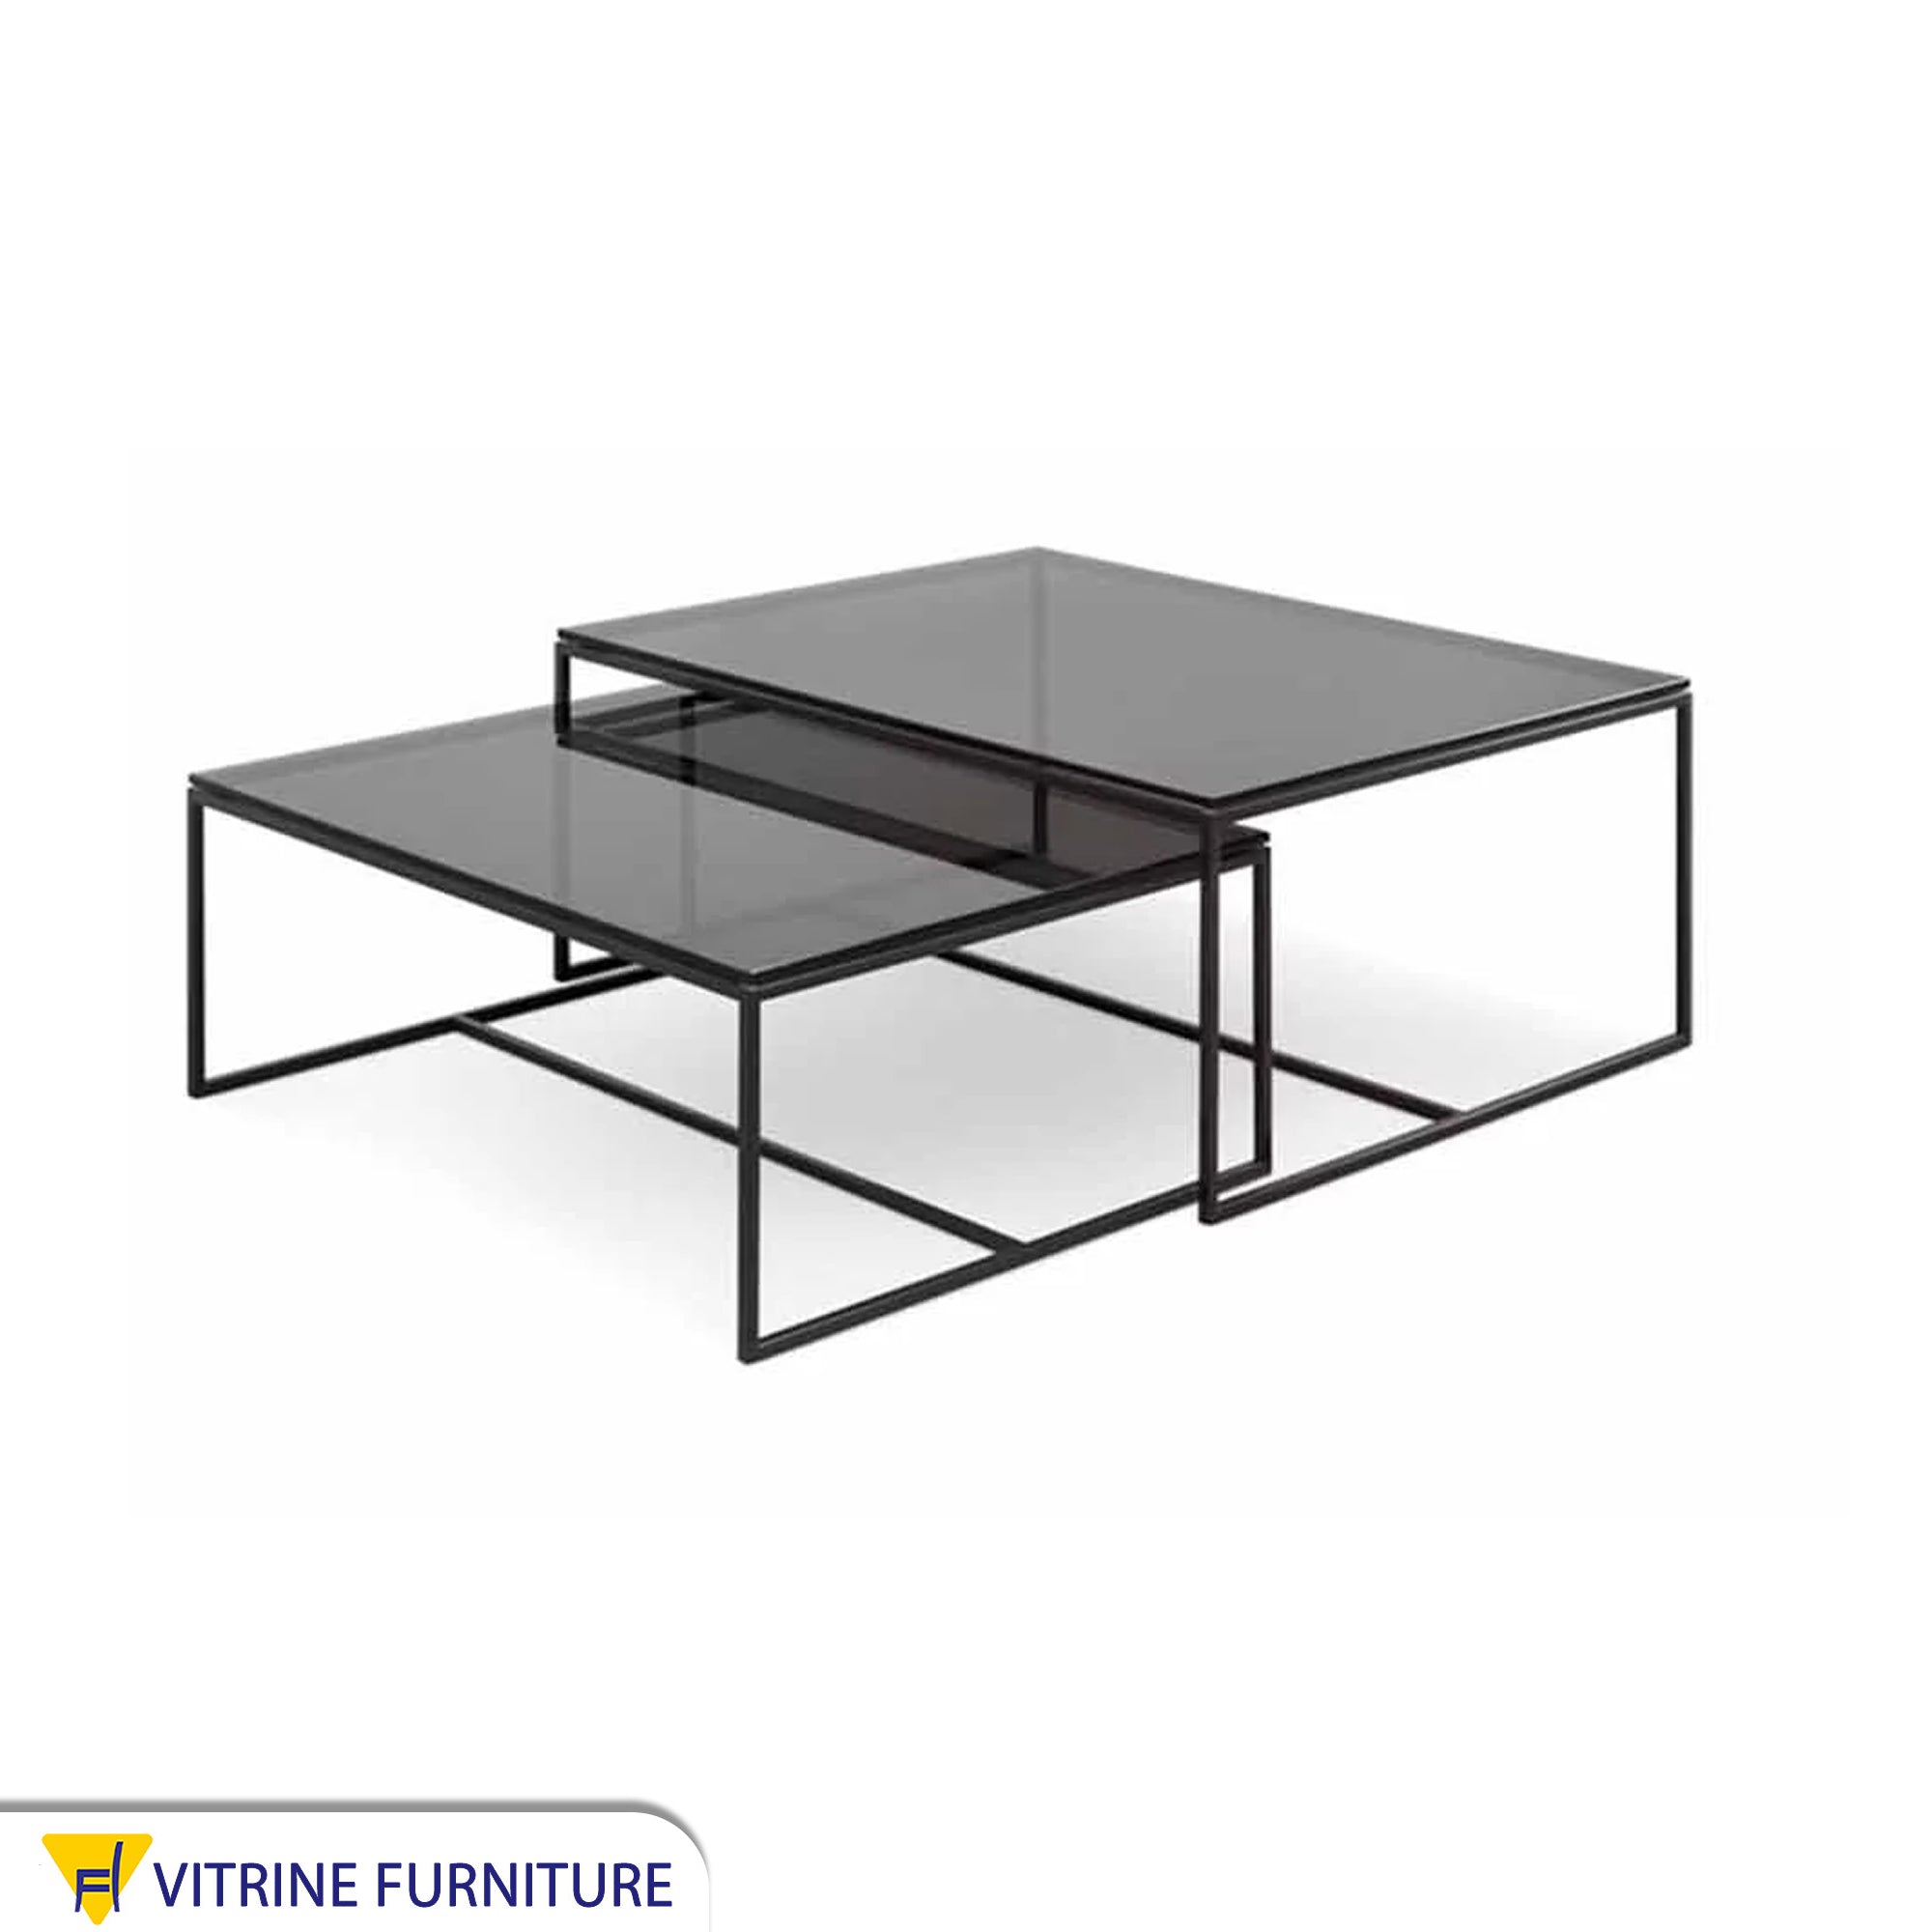 Two rectangular tables in black